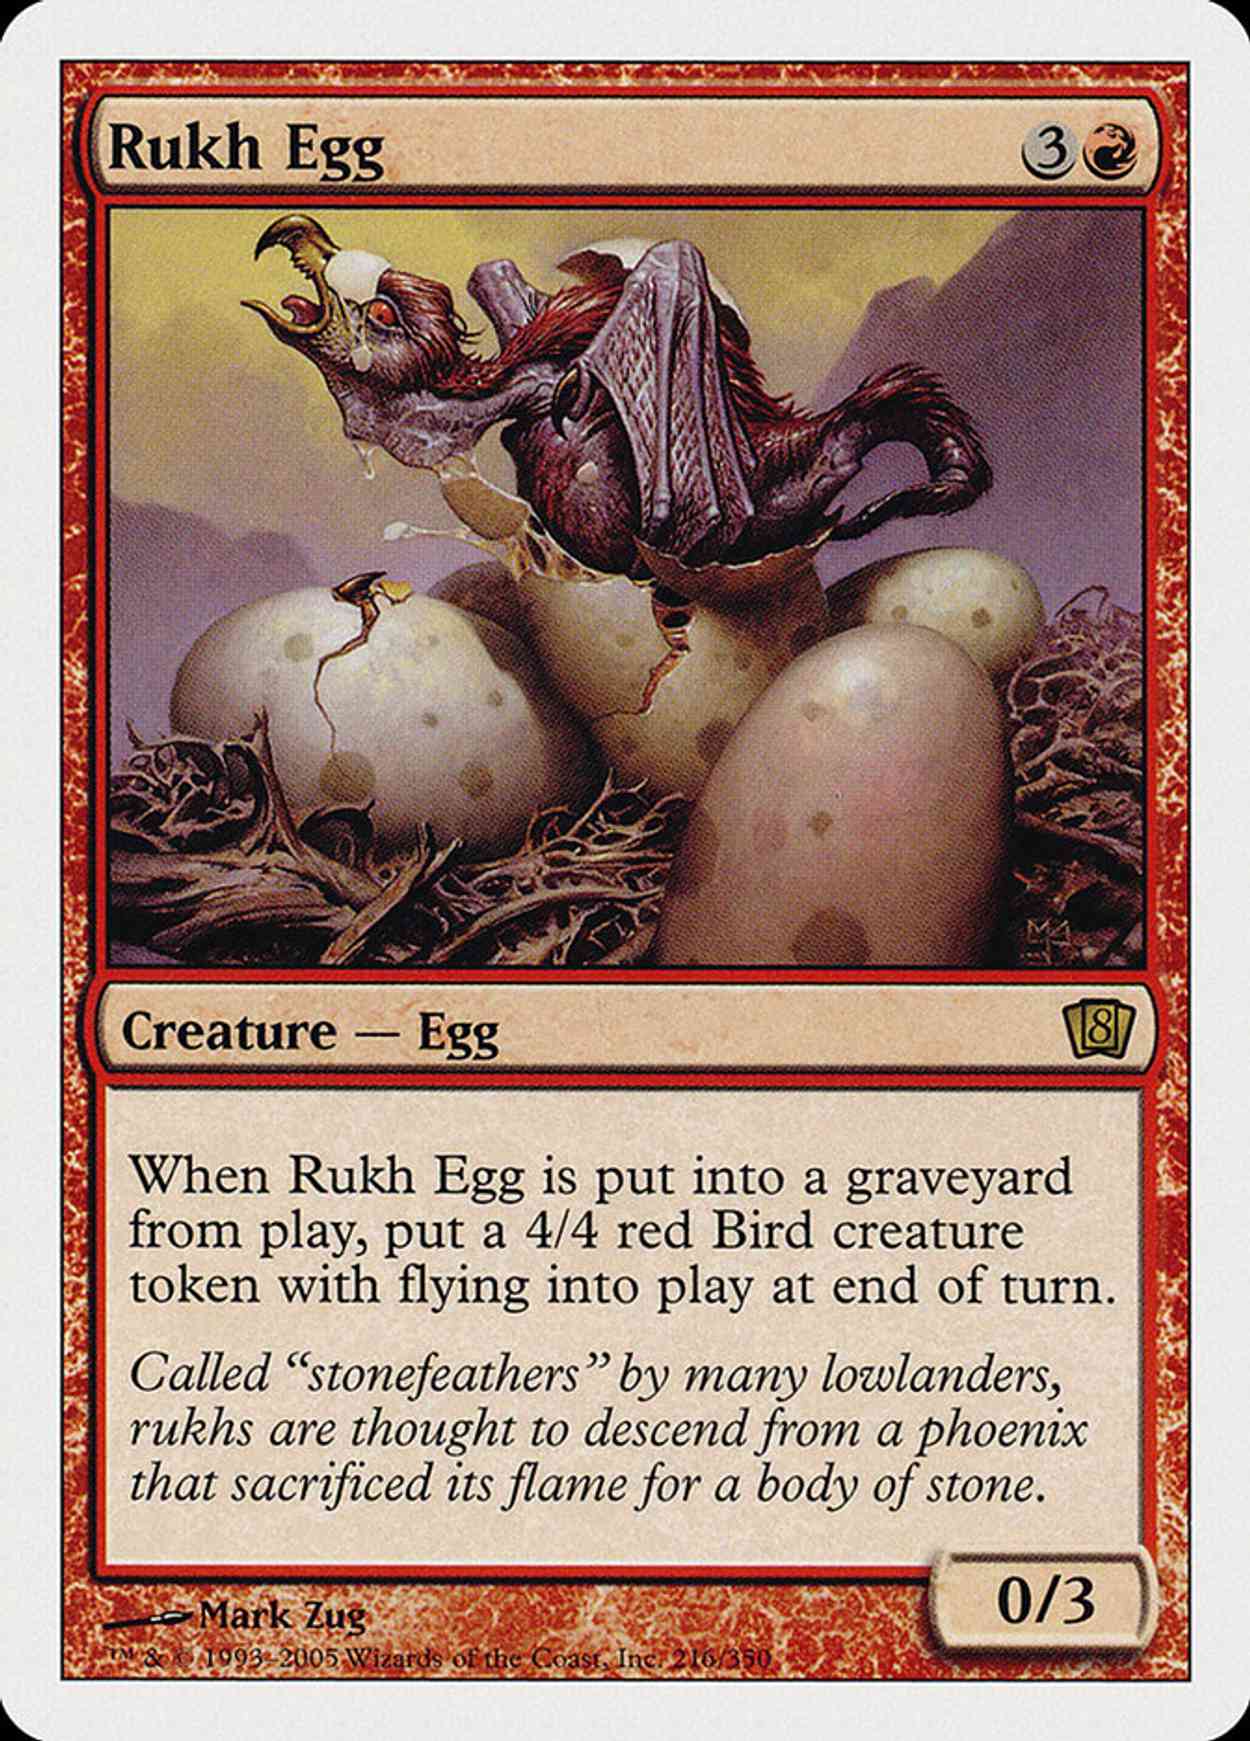 Rukh Egg (8th Edition) magic card front